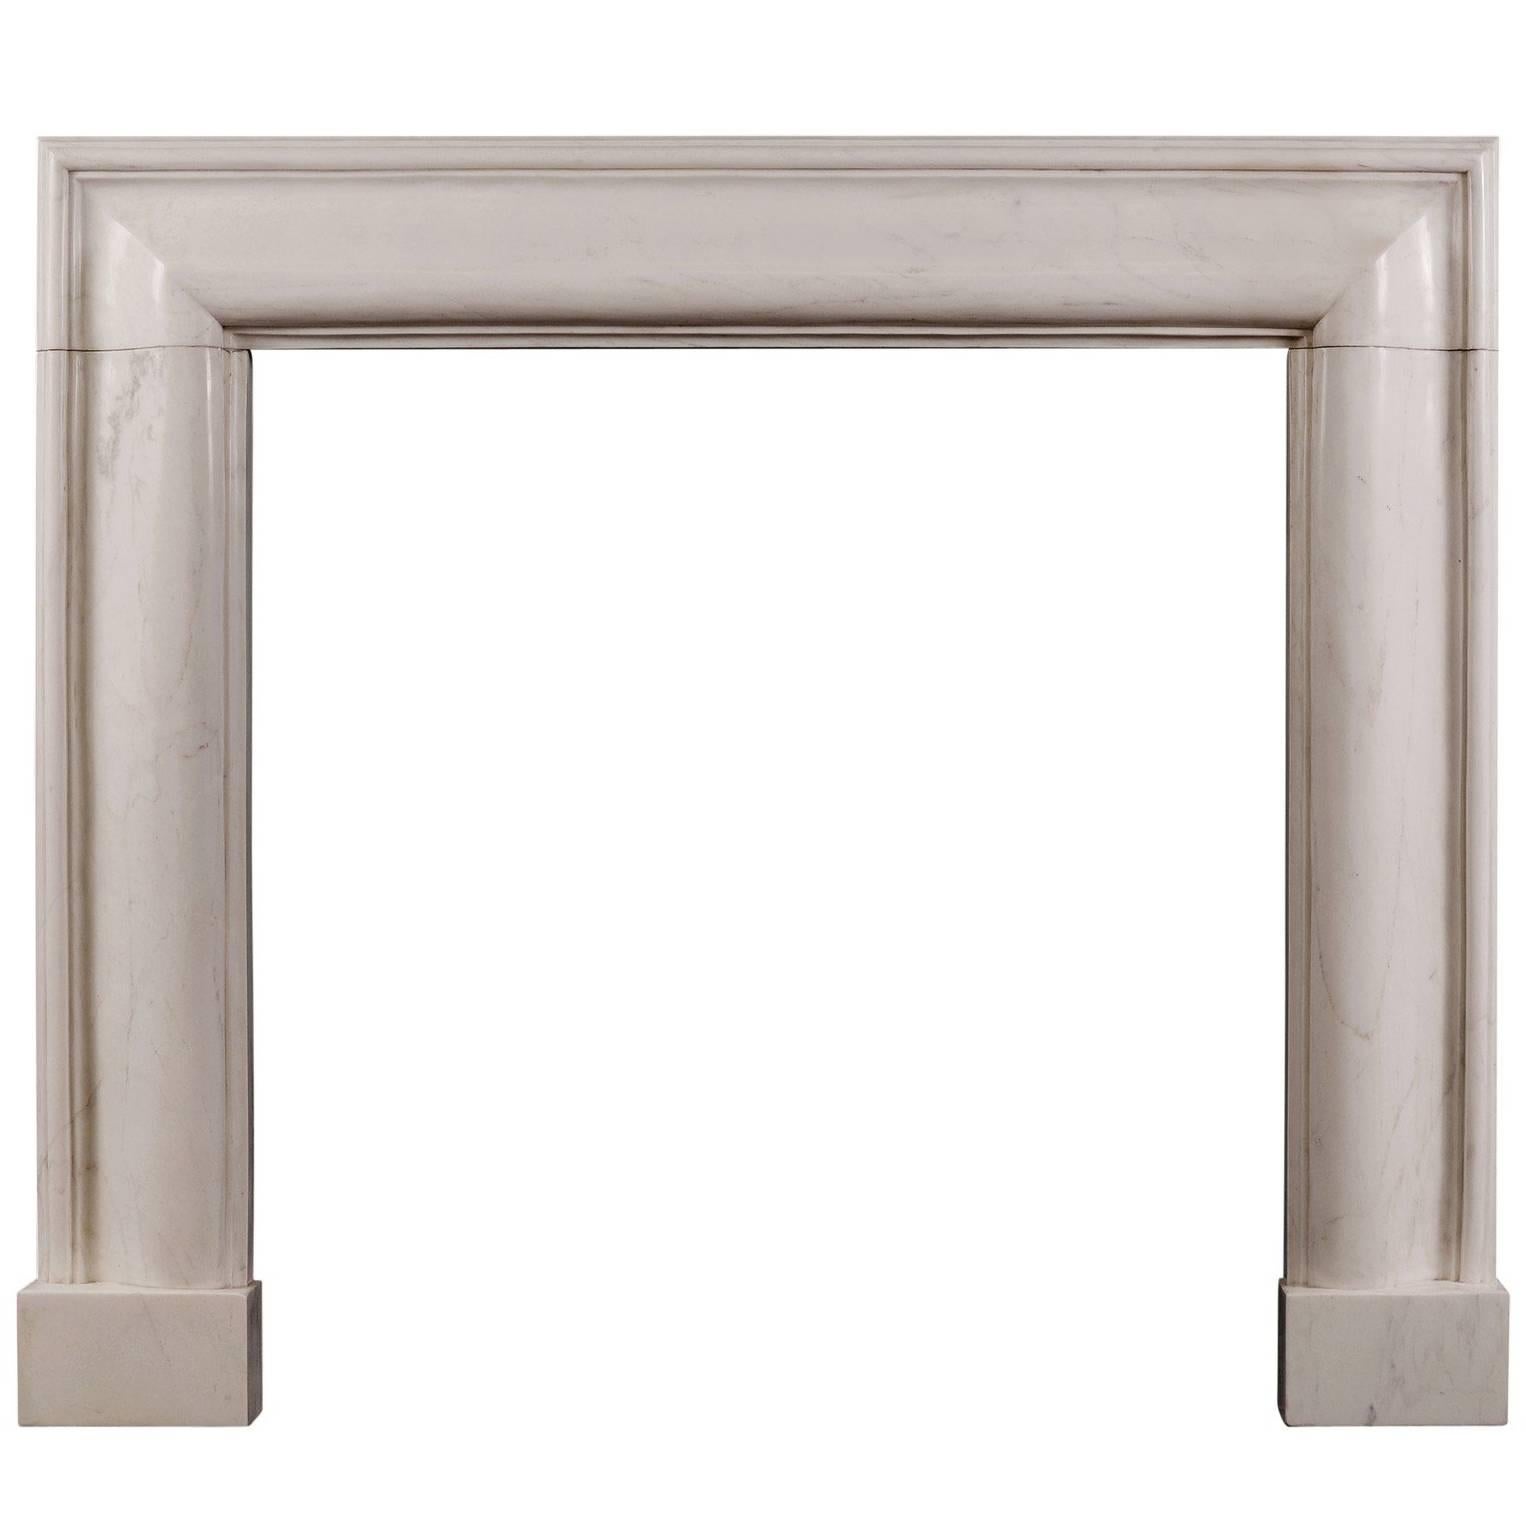 White Marble Bolection Fireplace For Sale